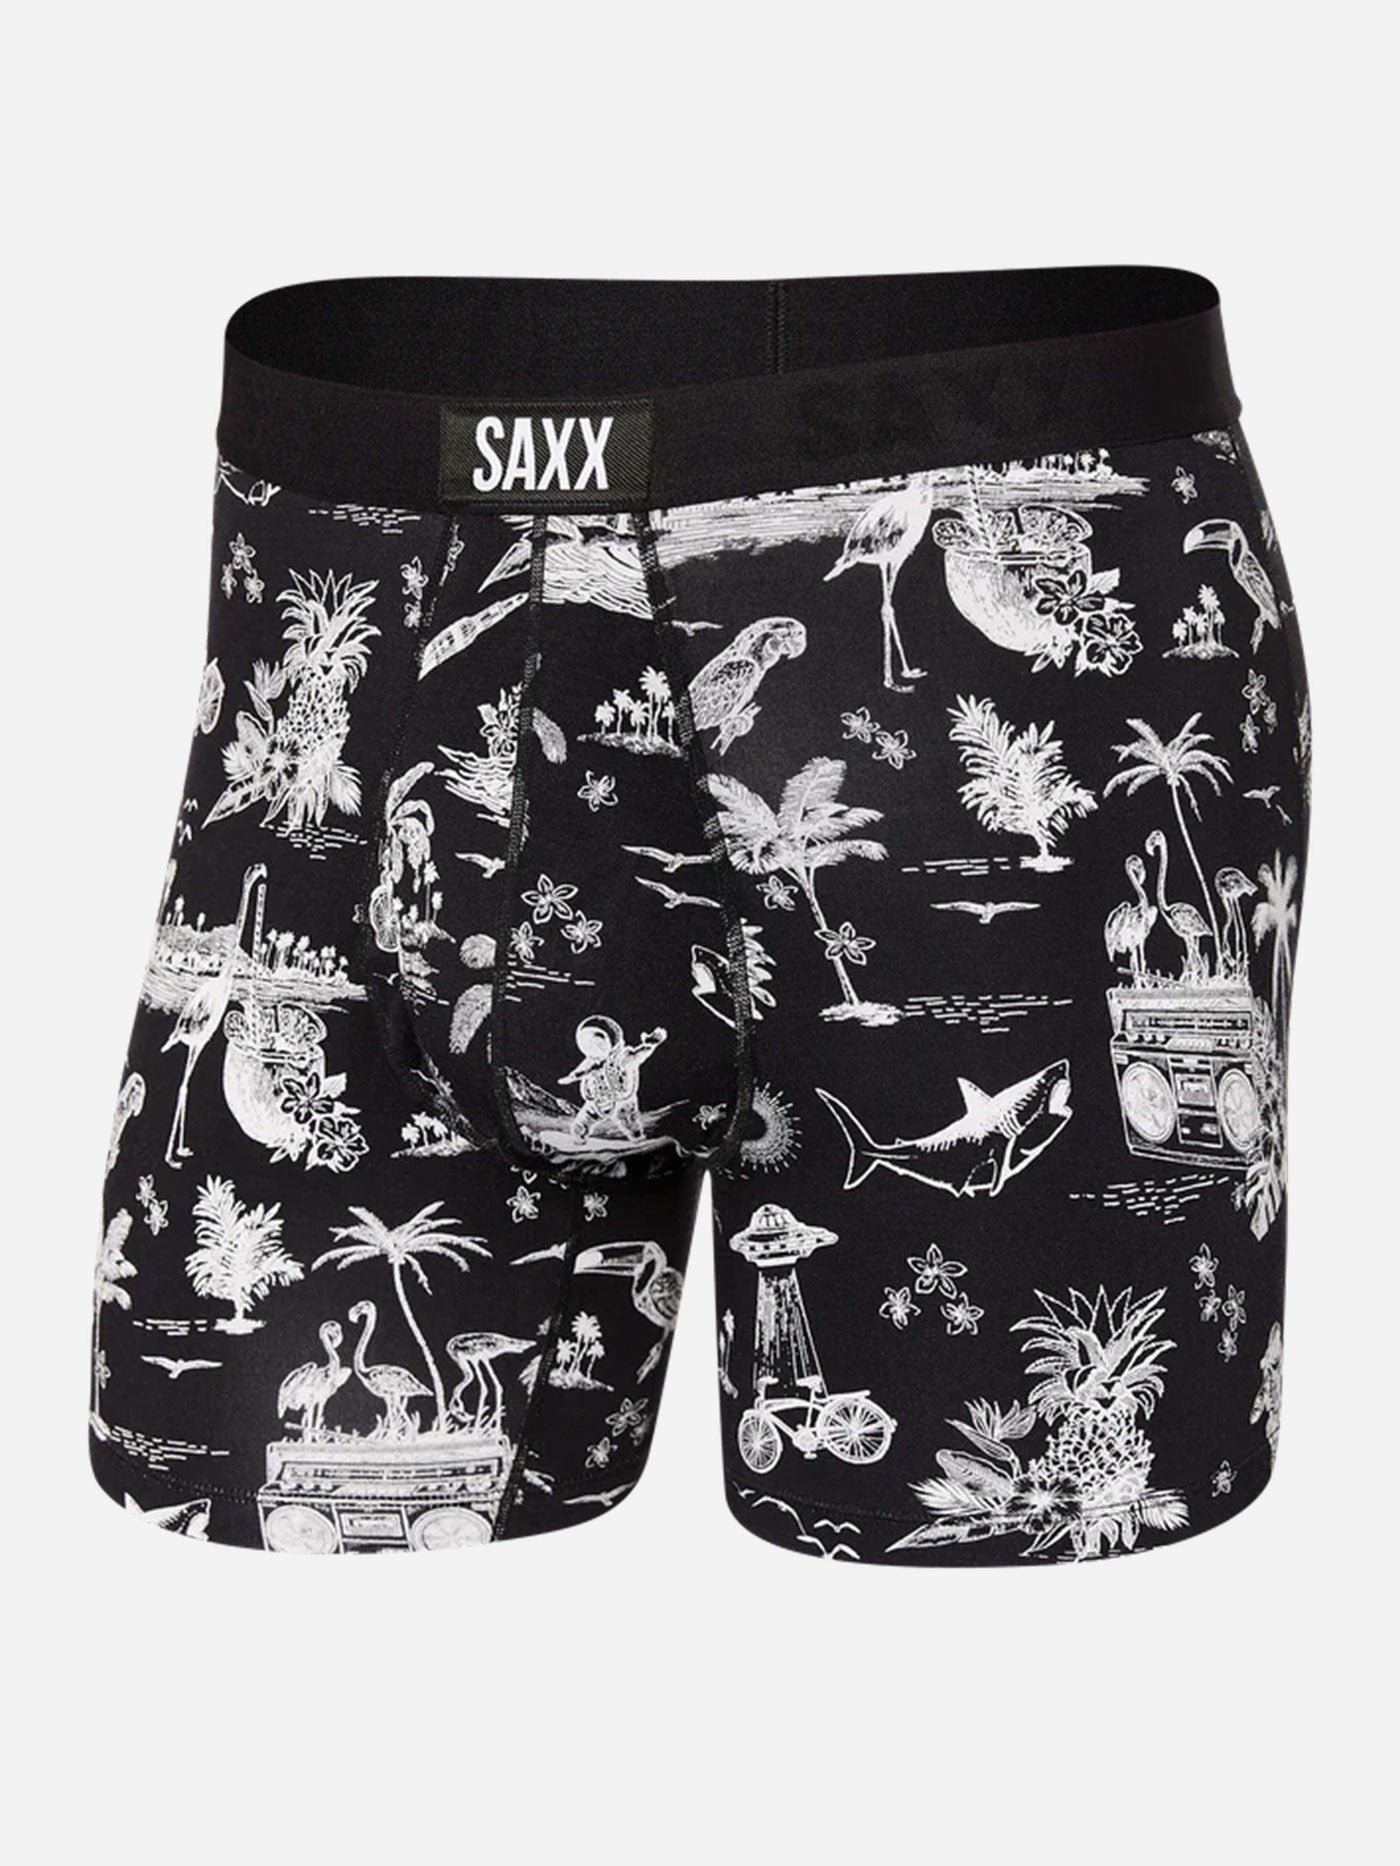 Saxx Ultra Brief Fly Black Astro Surf And Turf Boxer